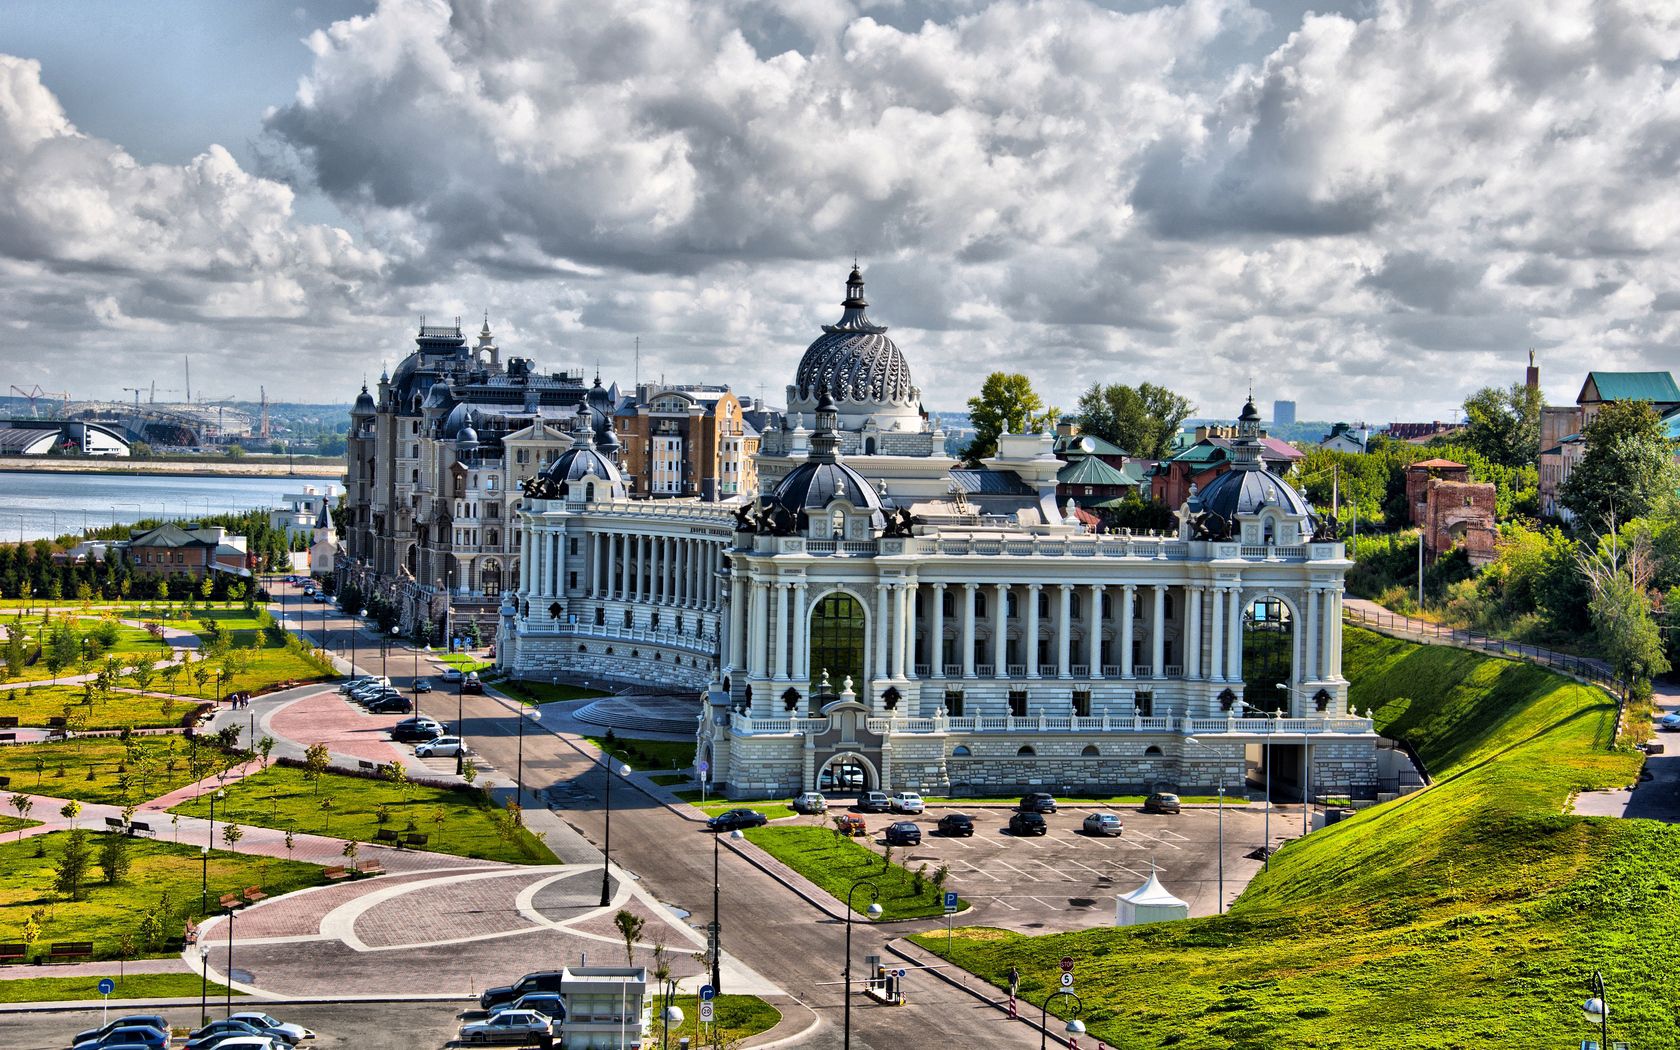 architecture, cities, handsomely, city, it's beautiful, kazan 32K